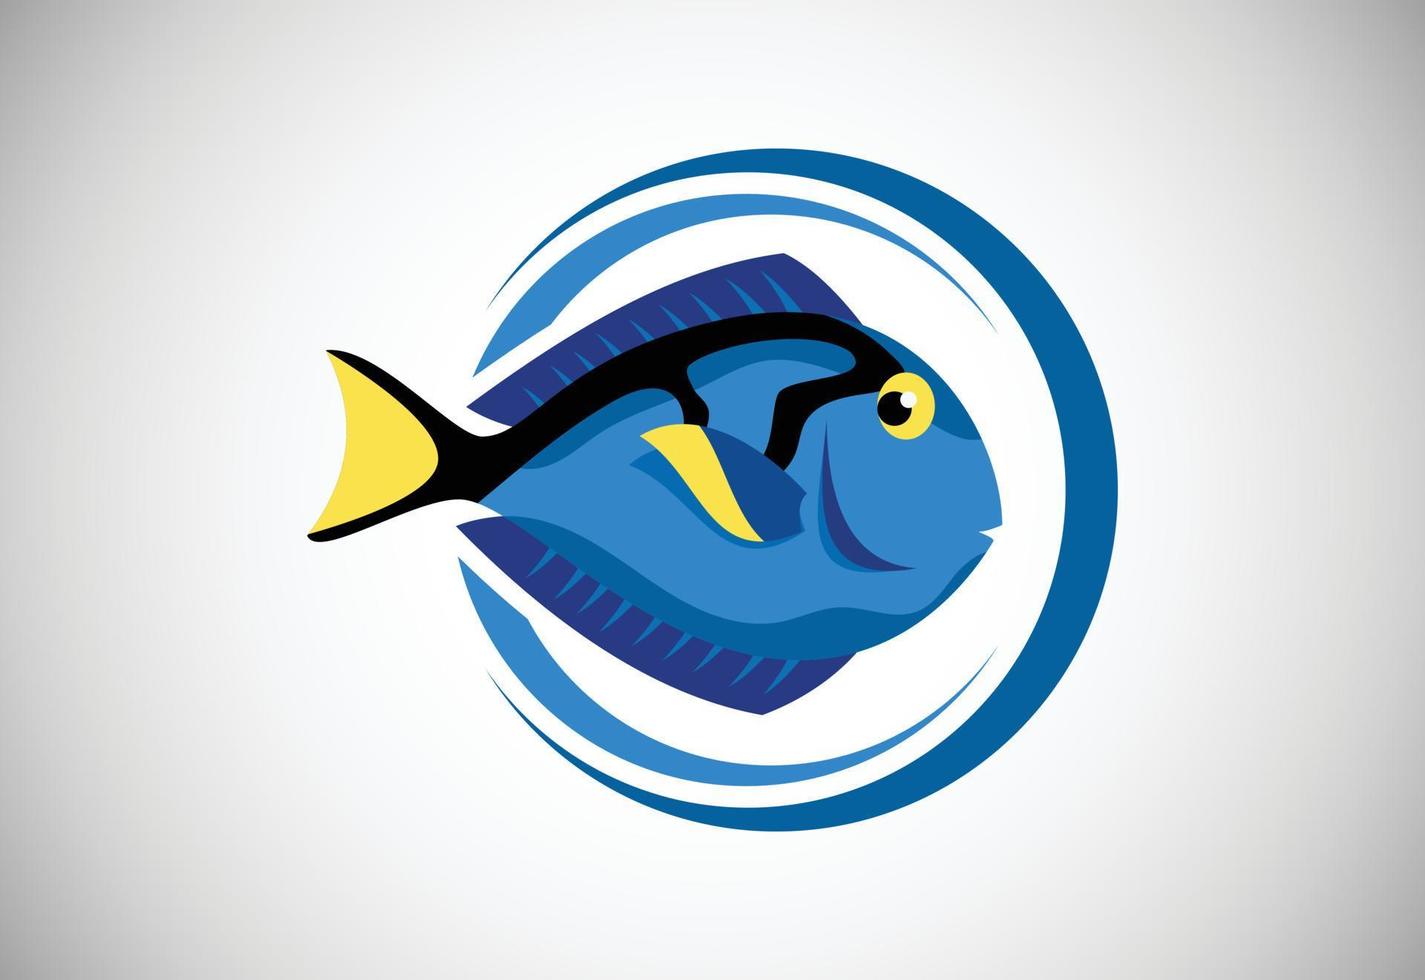 Blue Tang in a circle. Fish logo design template. Seafood restaurant shop Logotype concept icon. vector